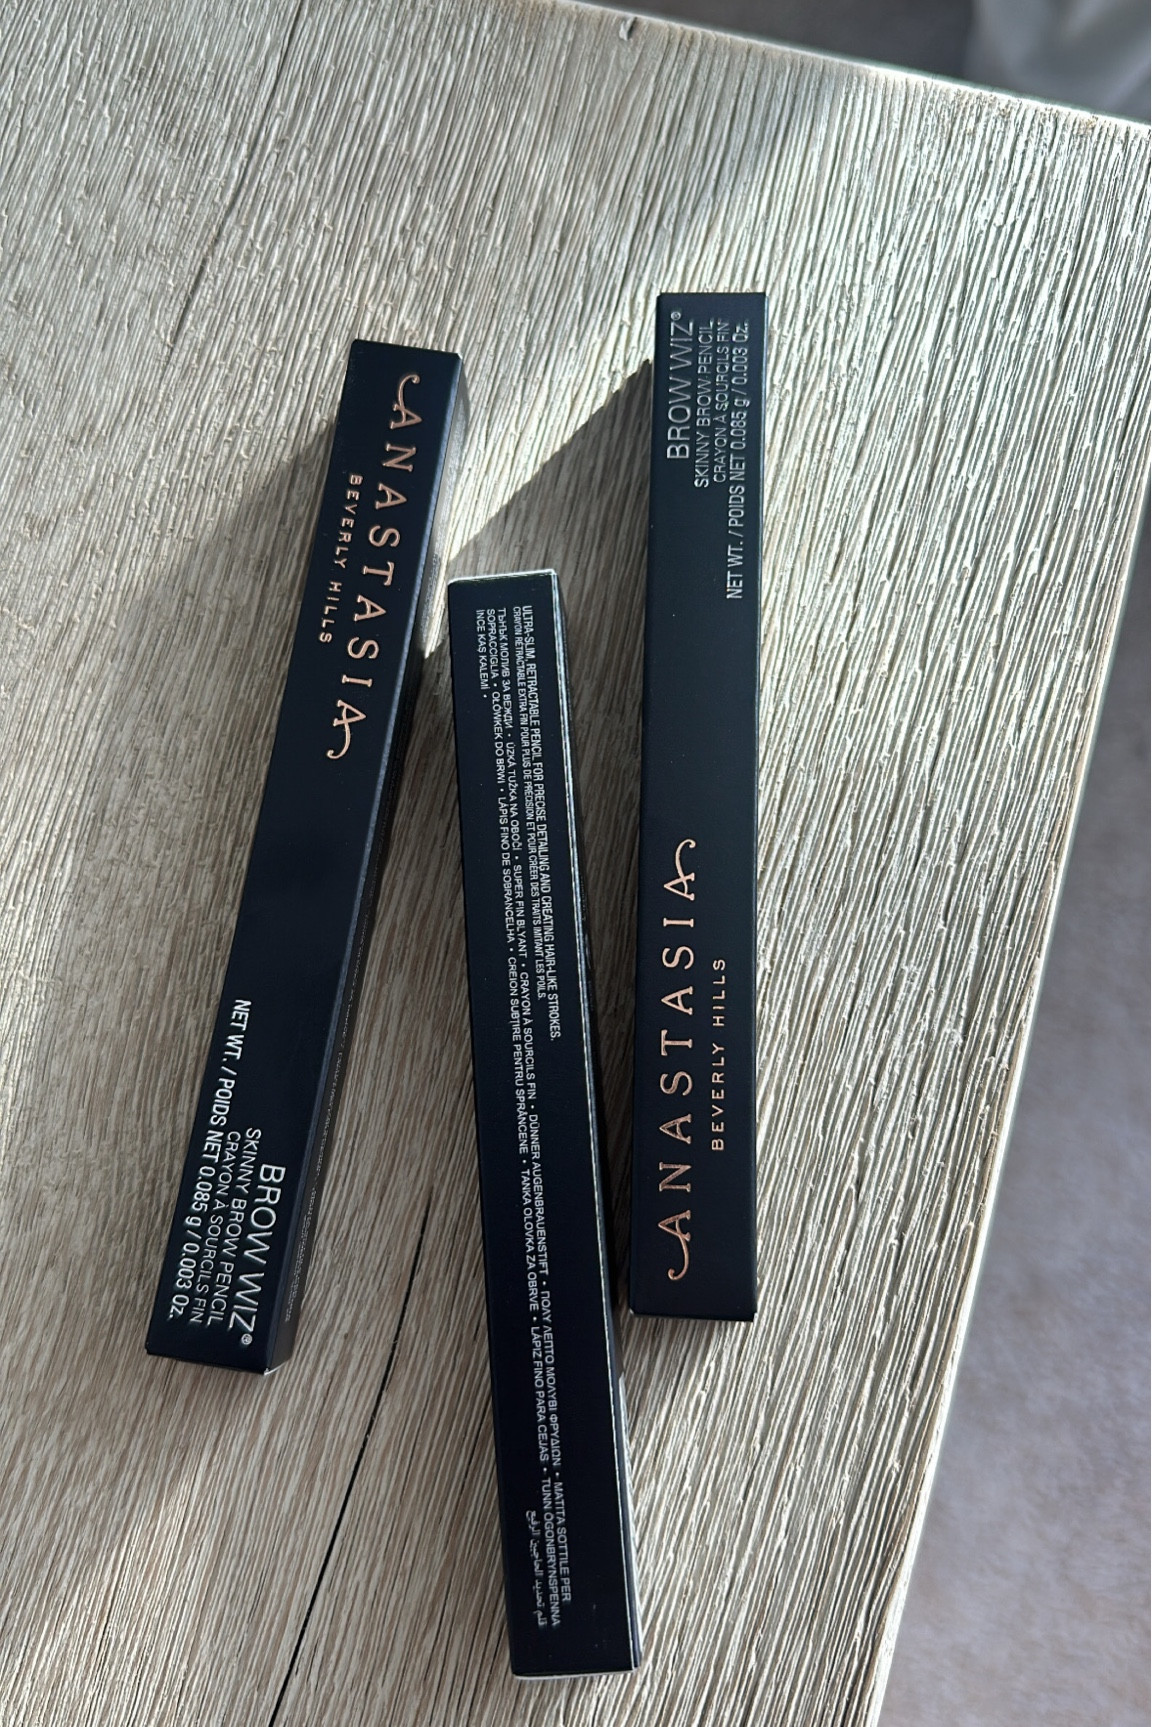 Hills - on Anastasia curated Beverly LTK Brow Wiz